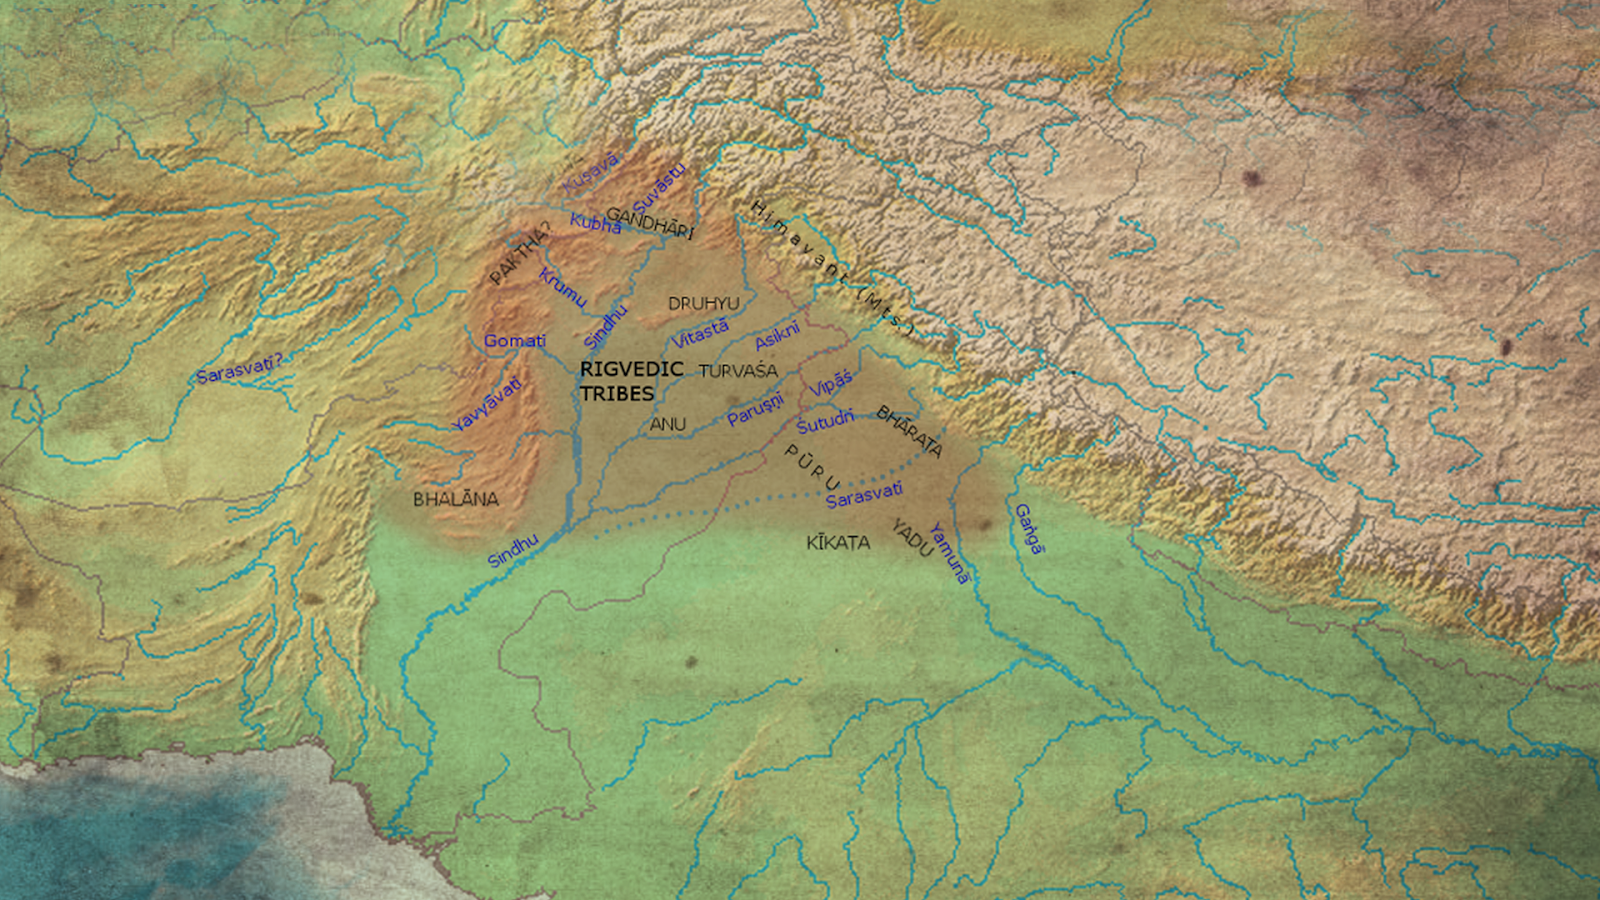 Map of Early Vedic Period (1700-1100 BCE) depicting the extent of Rigvedic culture